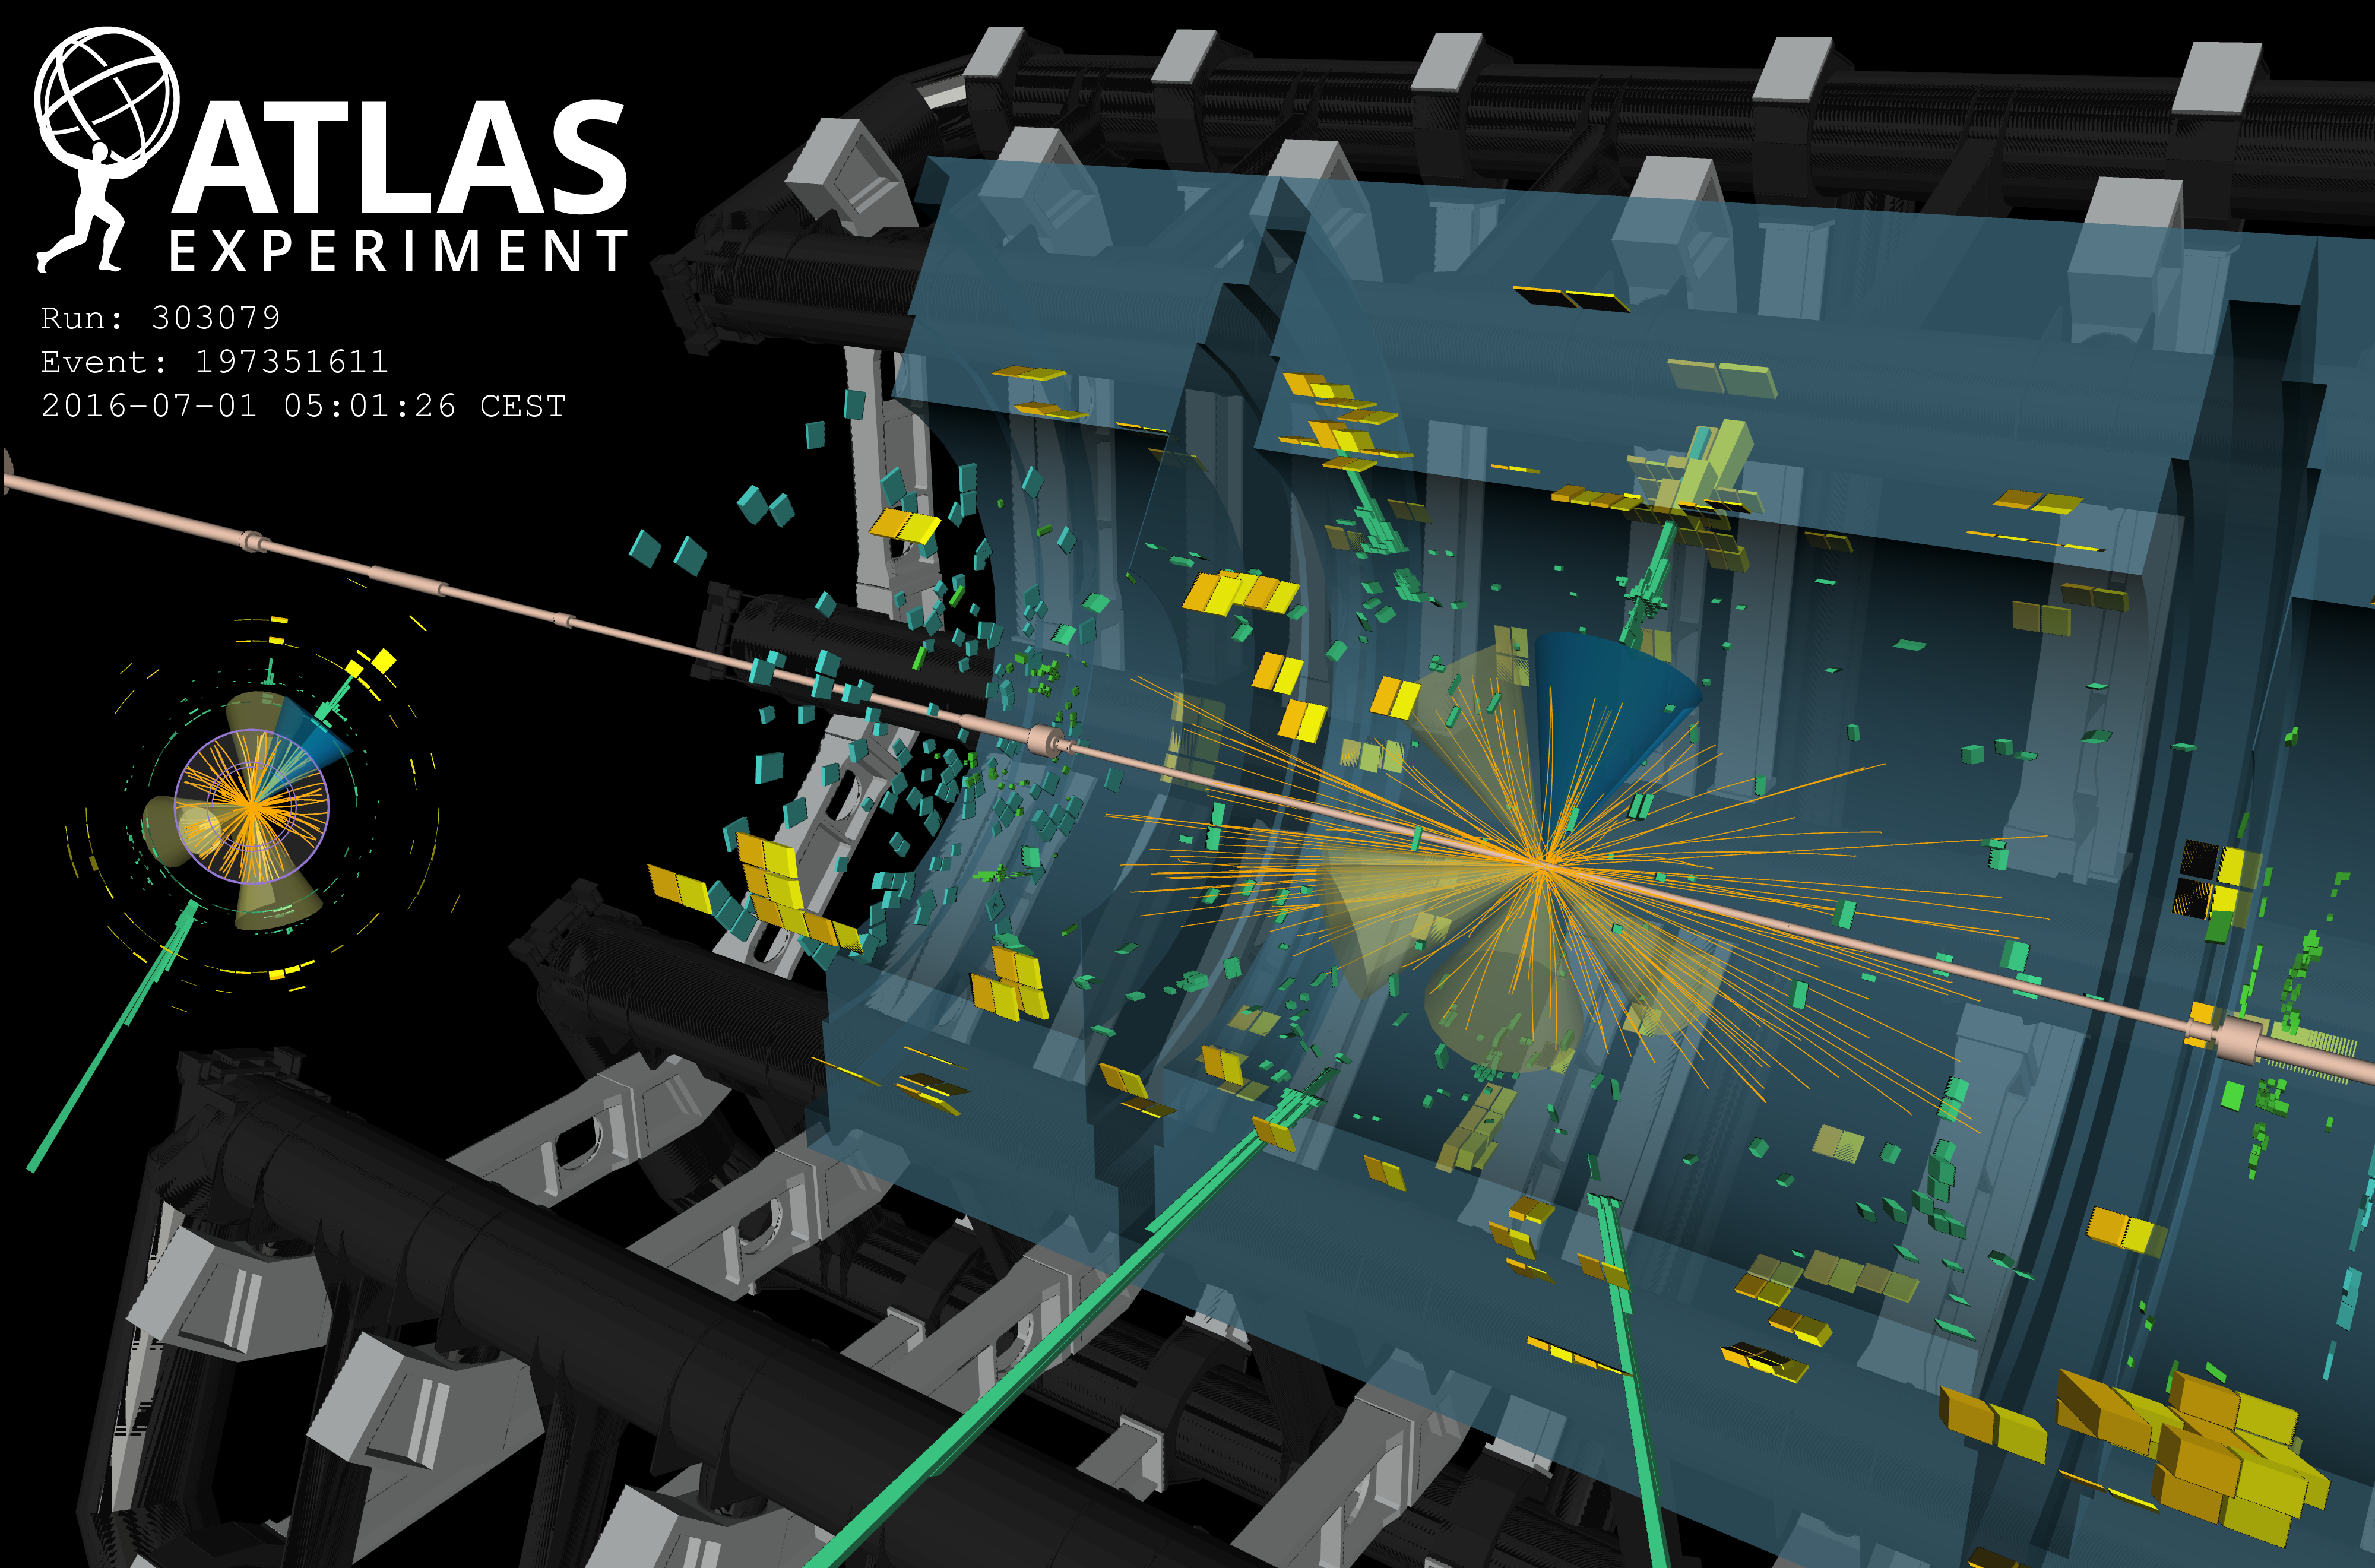 The event display shows associated Higgs-boson production with two top quarks, a process that is of vital importance to understanding the Higgs boson and represents a major challenge for precision calculations (Image: ATLAS collaboration)